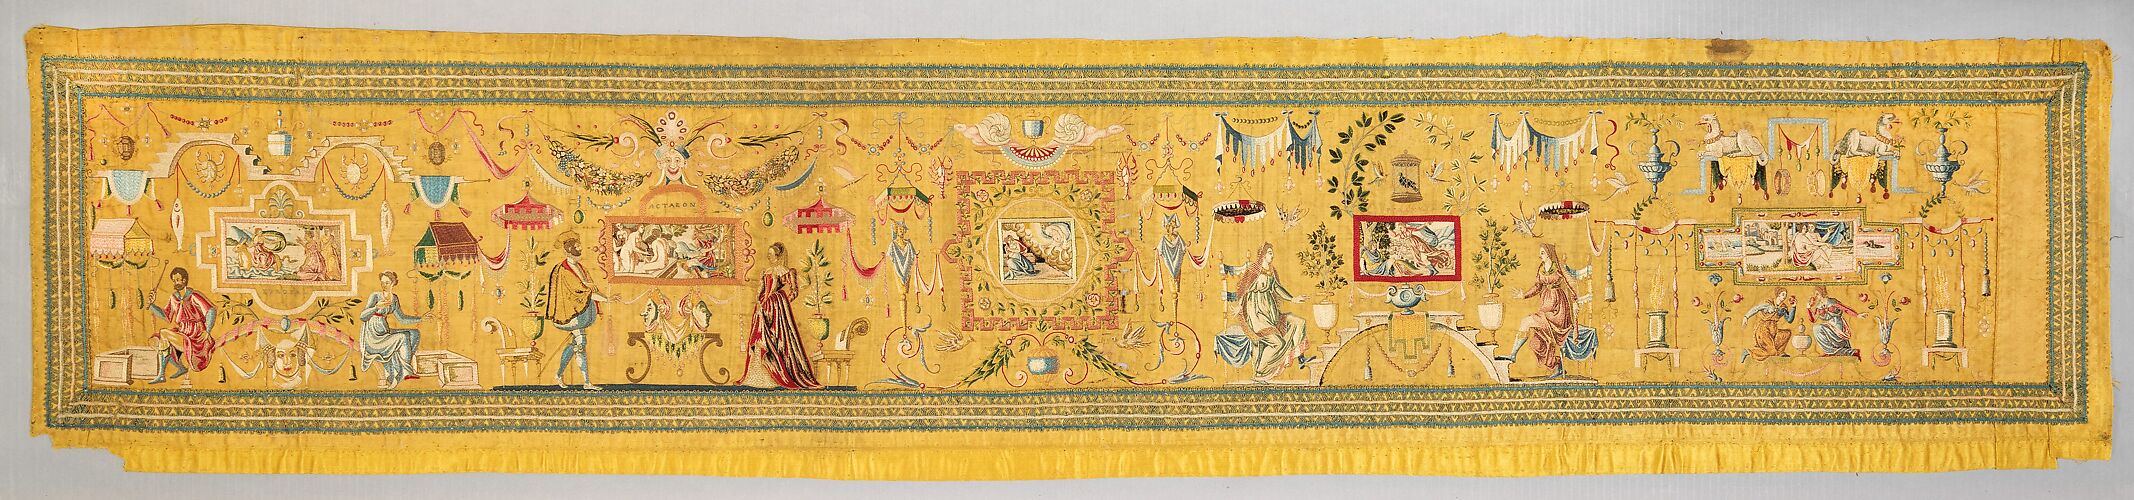 Embroidered panel with Grotesque decoration